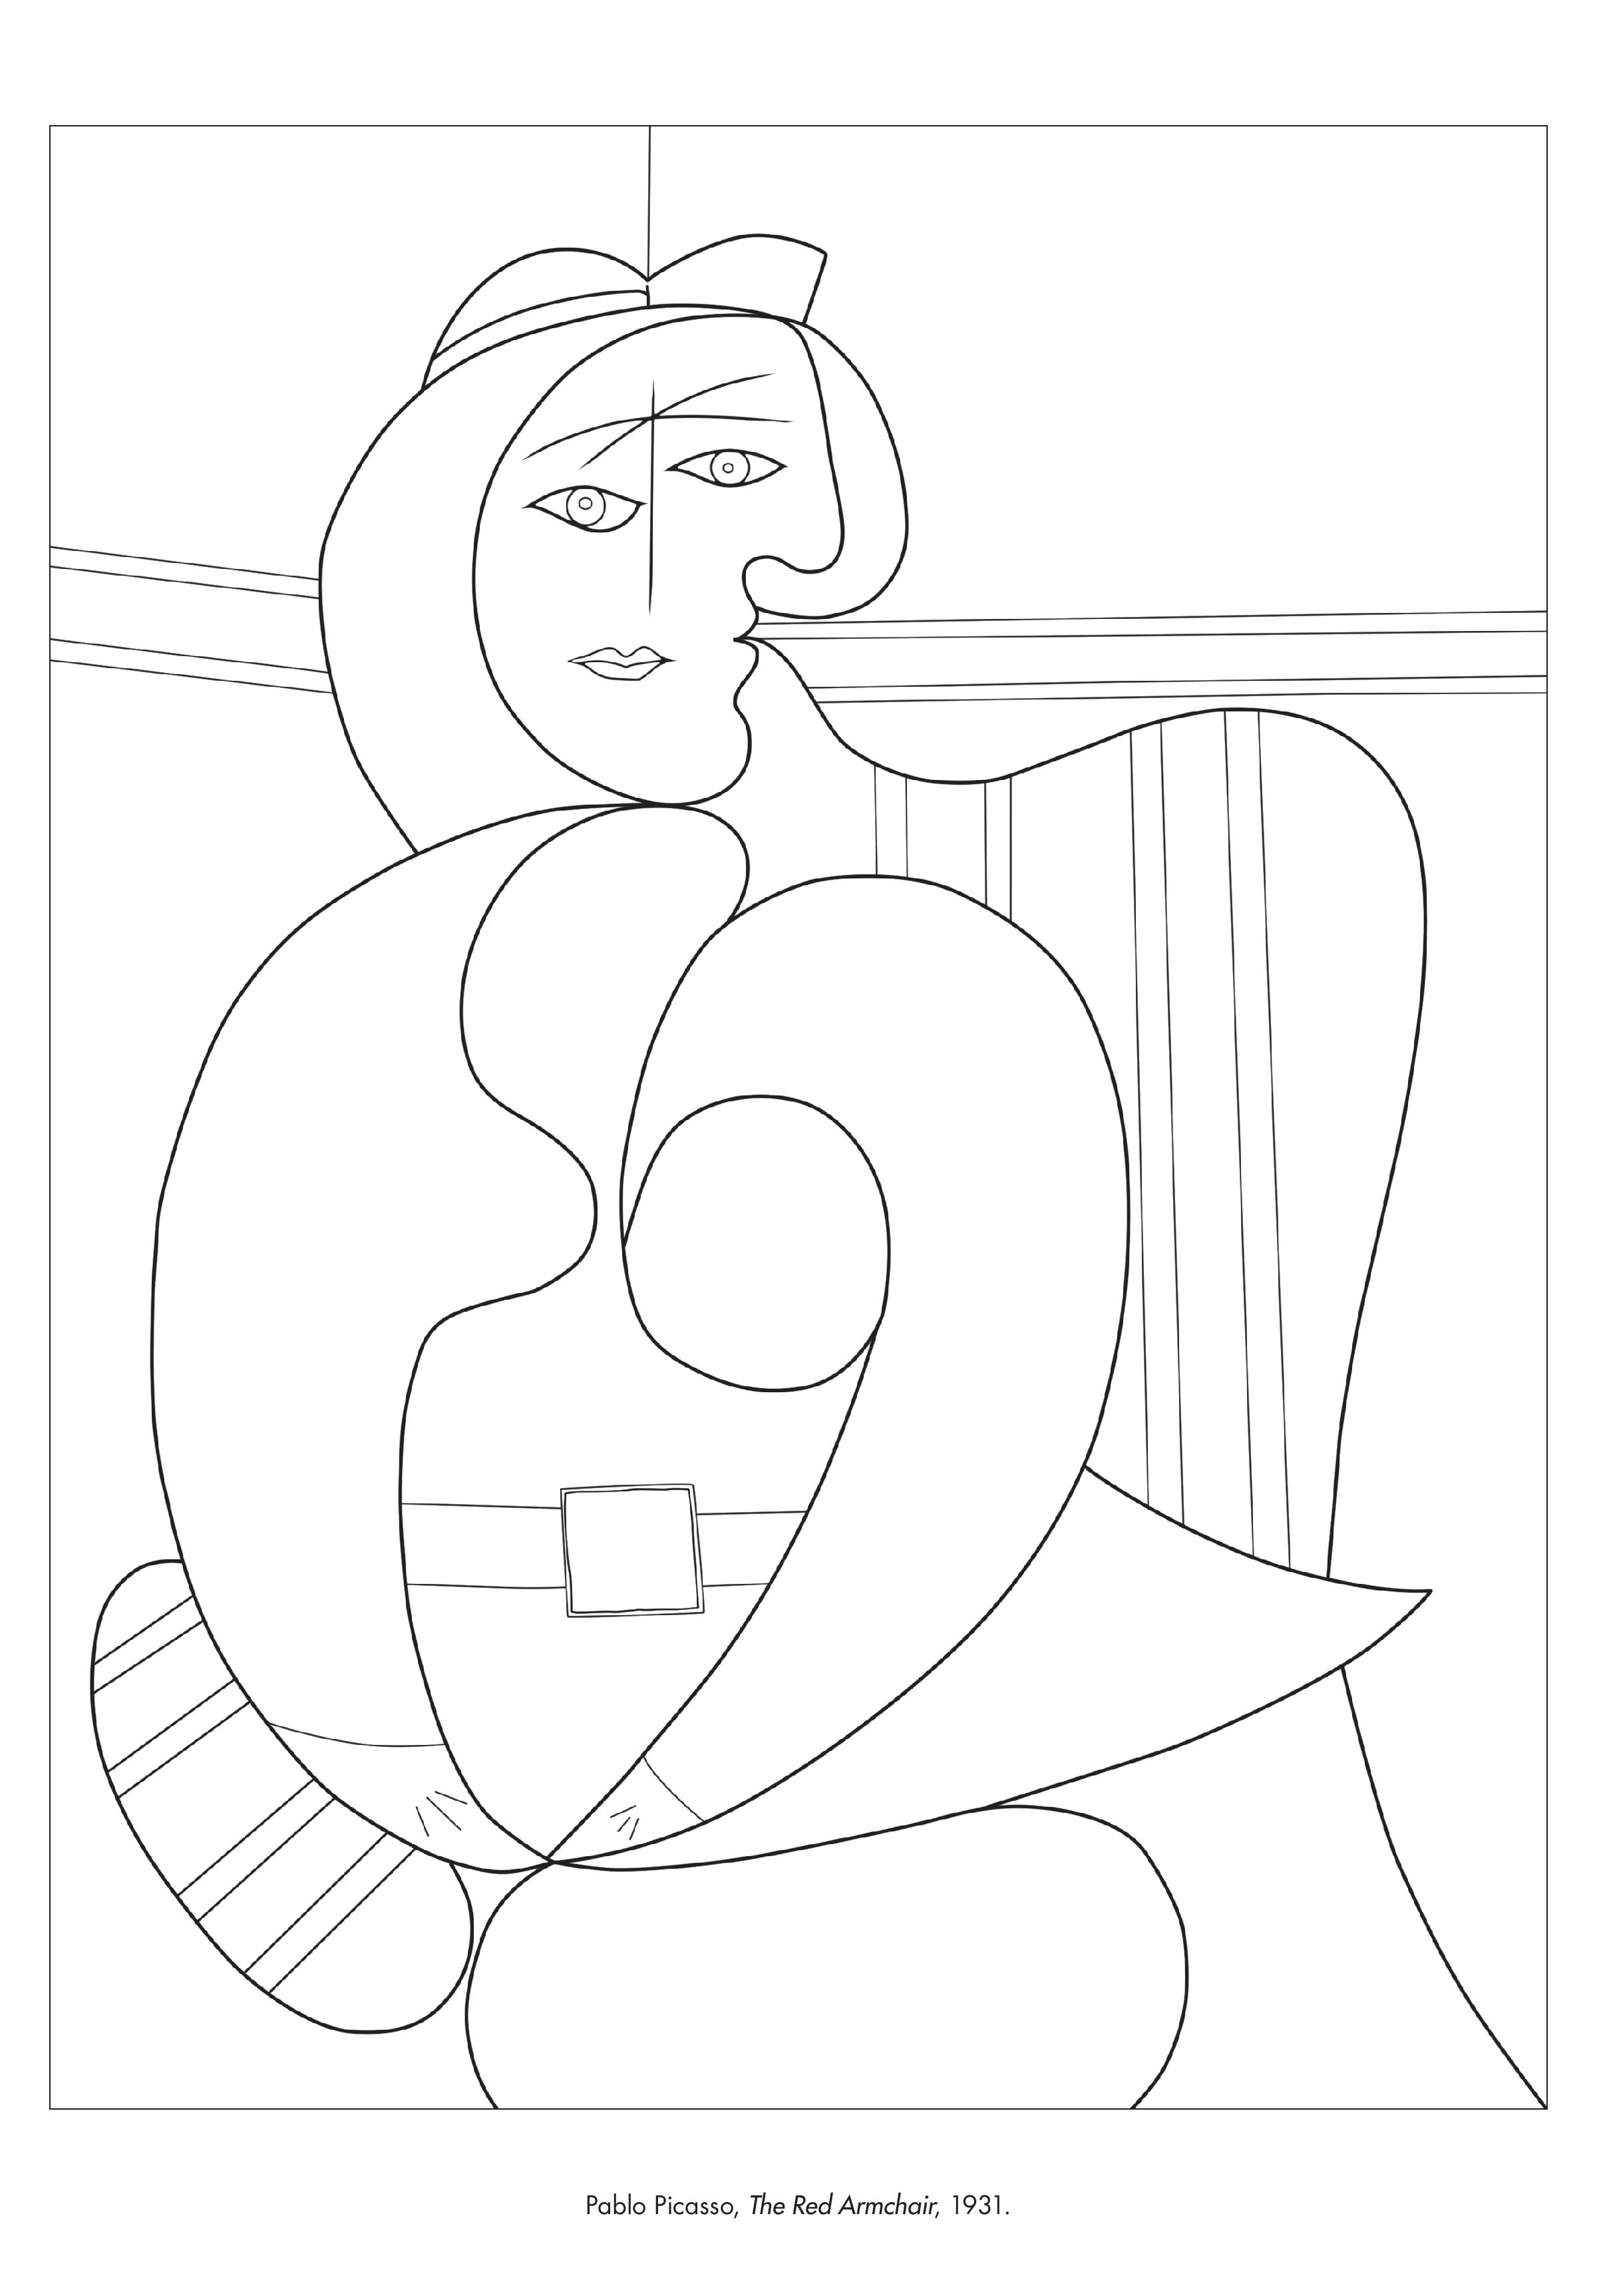 pablo-picasso-coloring-pages-at-getcolorings-free-printable-colorings-pages-to-print-and-color